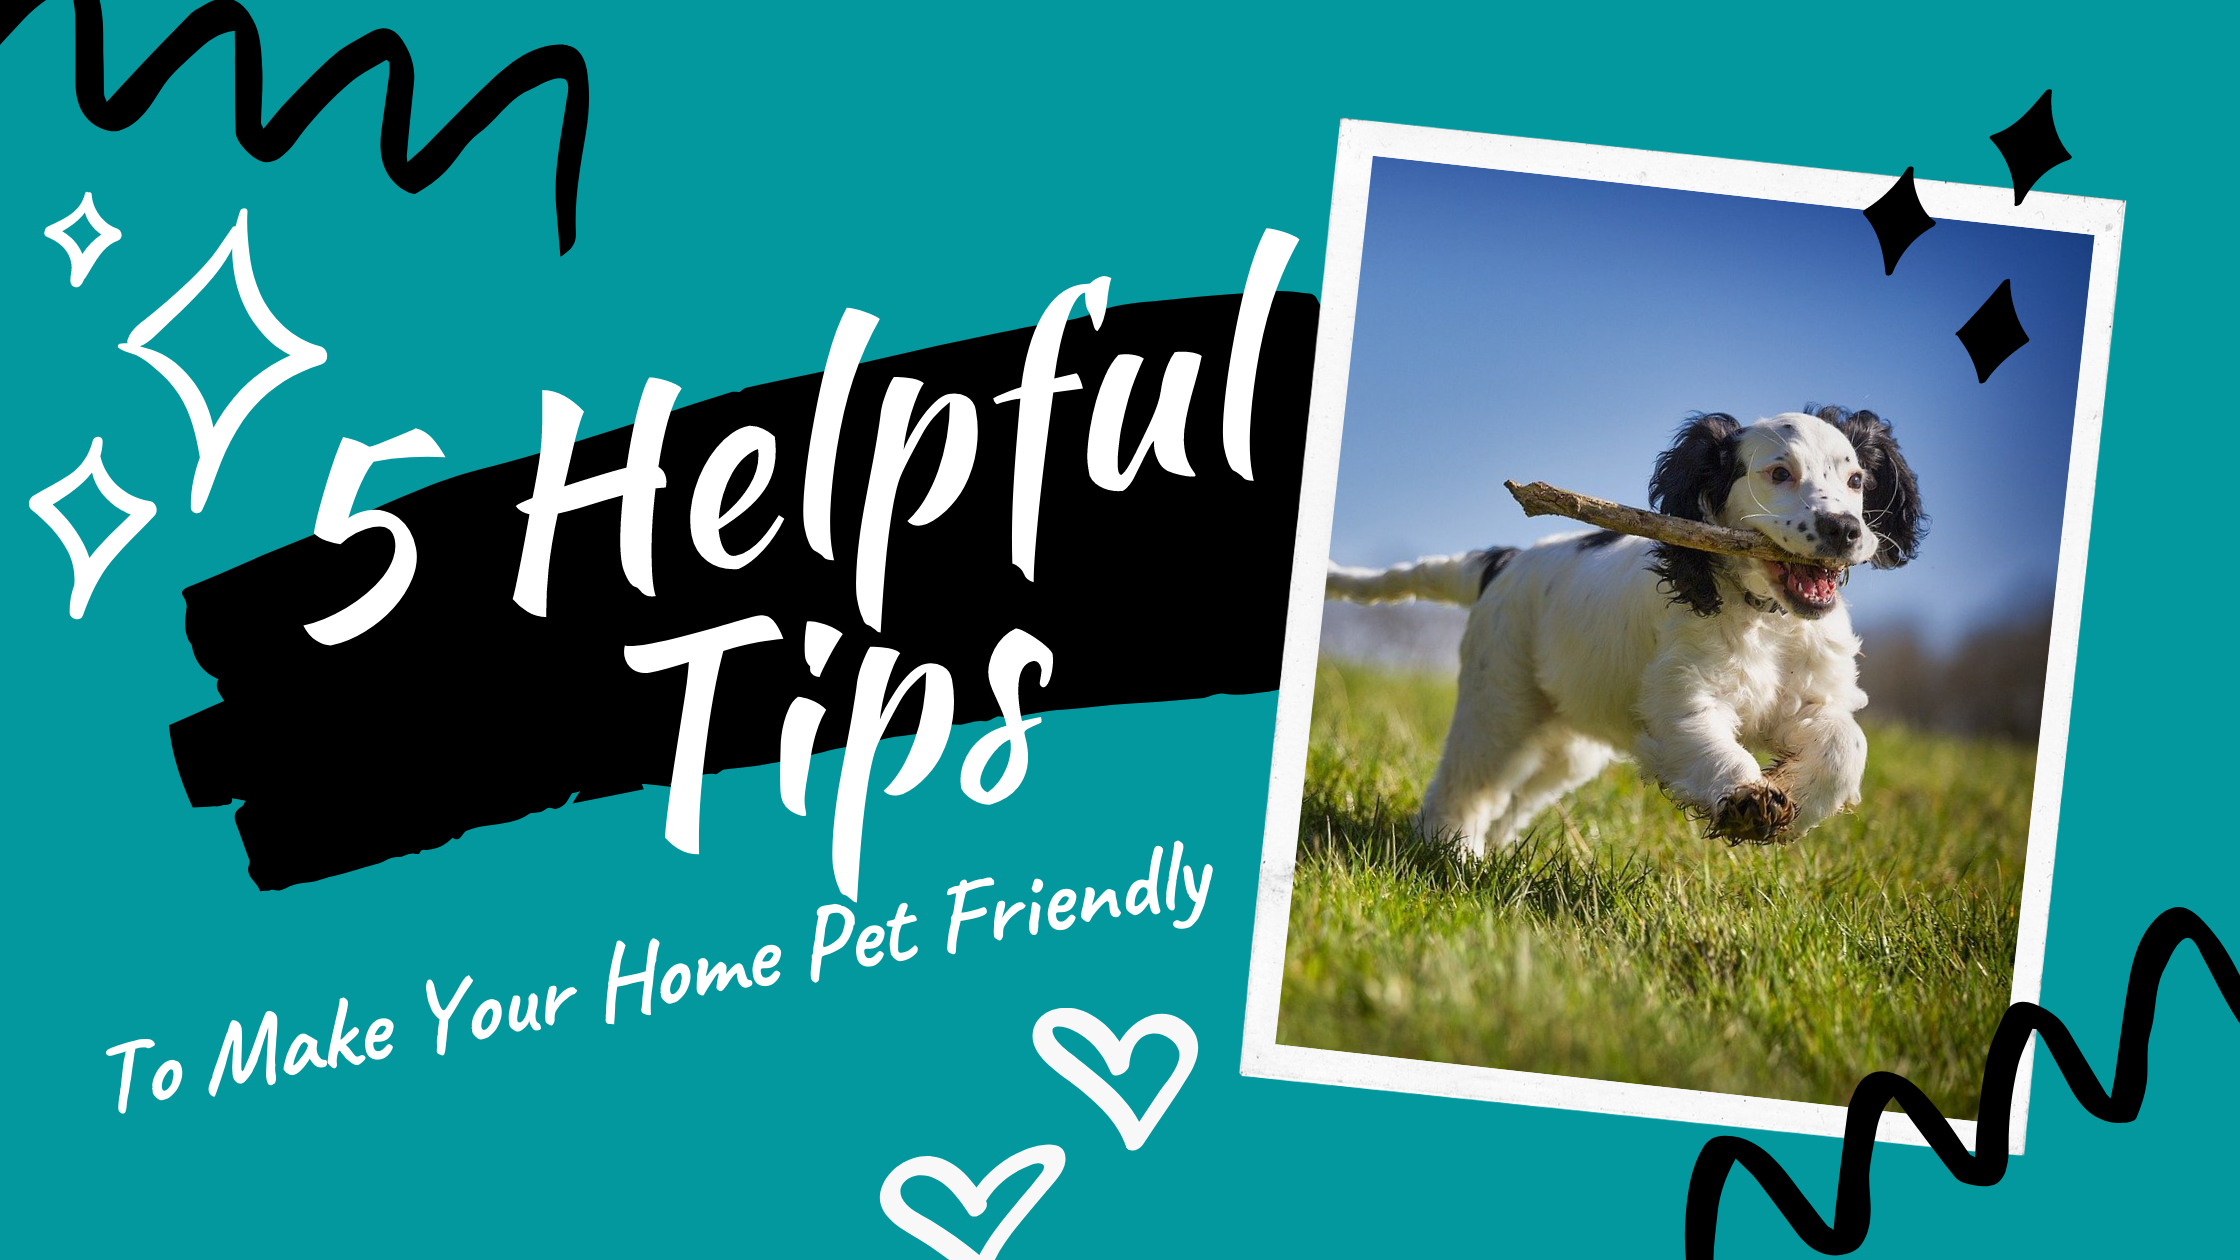 5 Helpful Tips to Make Your Home Pet Friendly